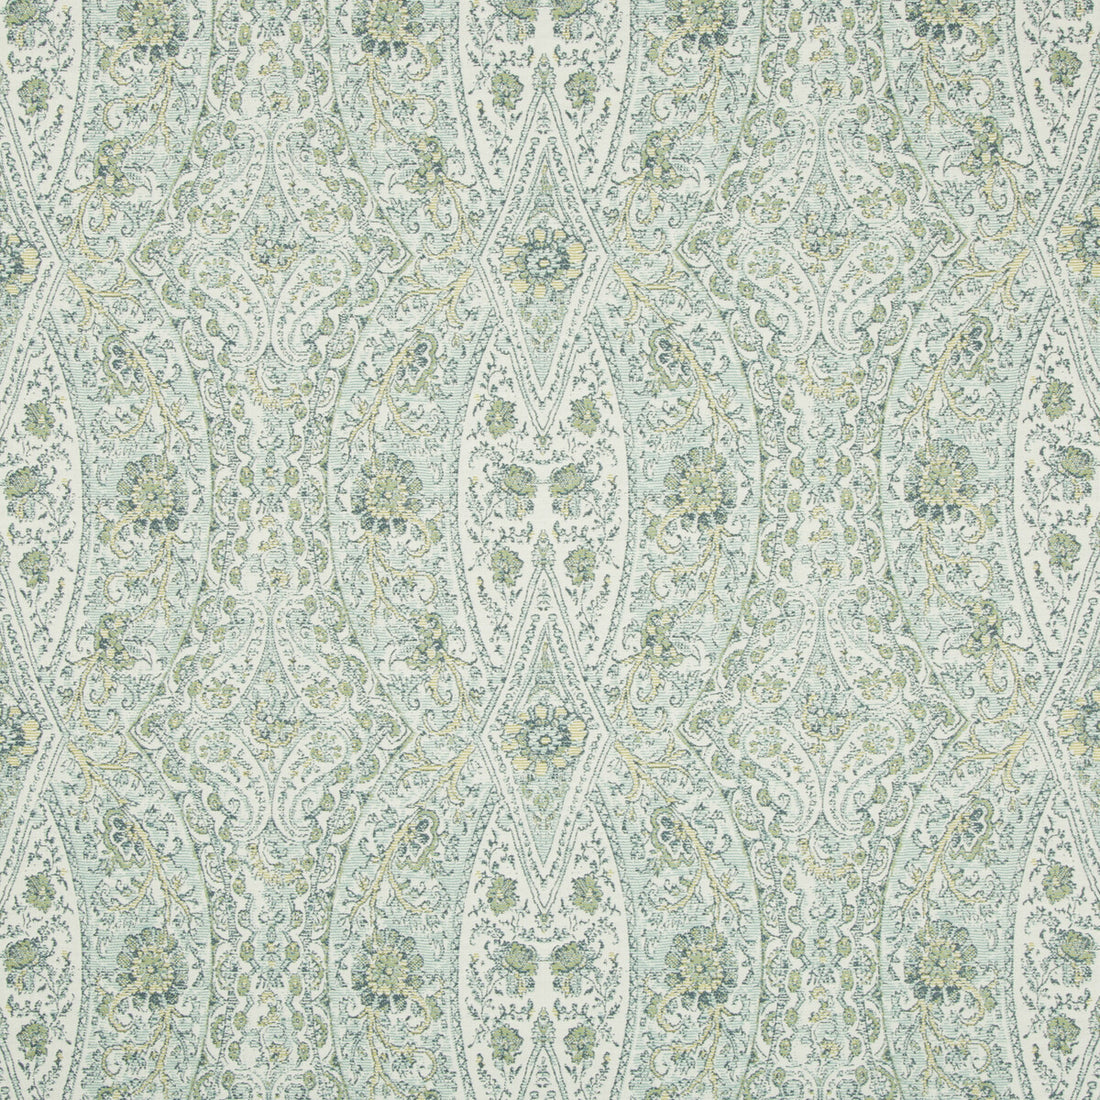 Kravet Contract fabric in 34760-35 color - pattern 34760.35.0 - by Kravet Contract in the Crypton Incase collection